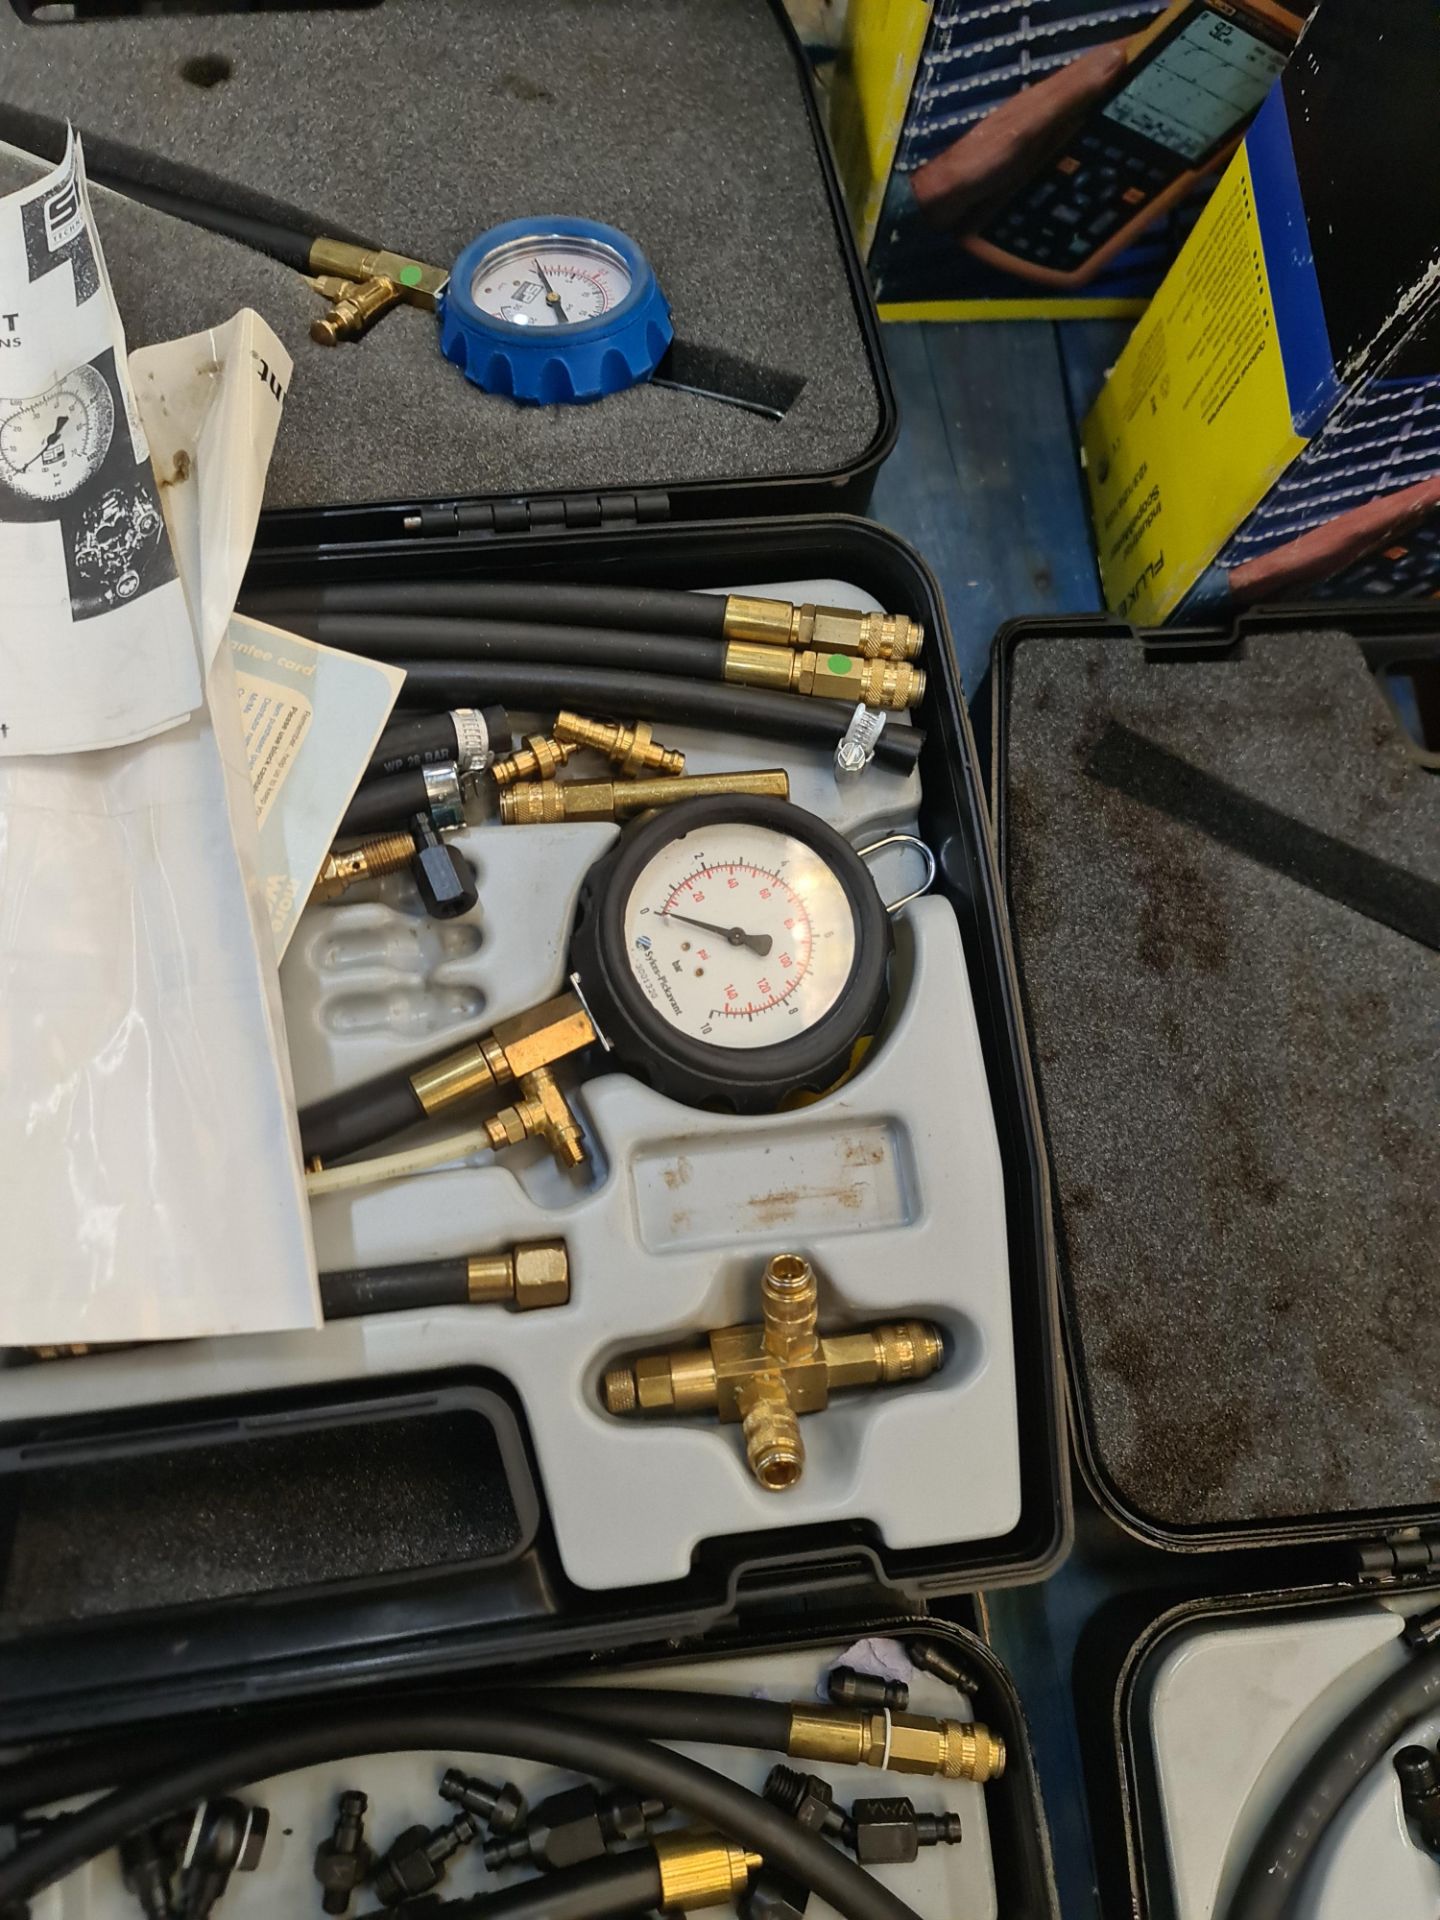 Fuel pressure measurement kit in case with ancillaries plus additional case and contents - Image 4 of 6